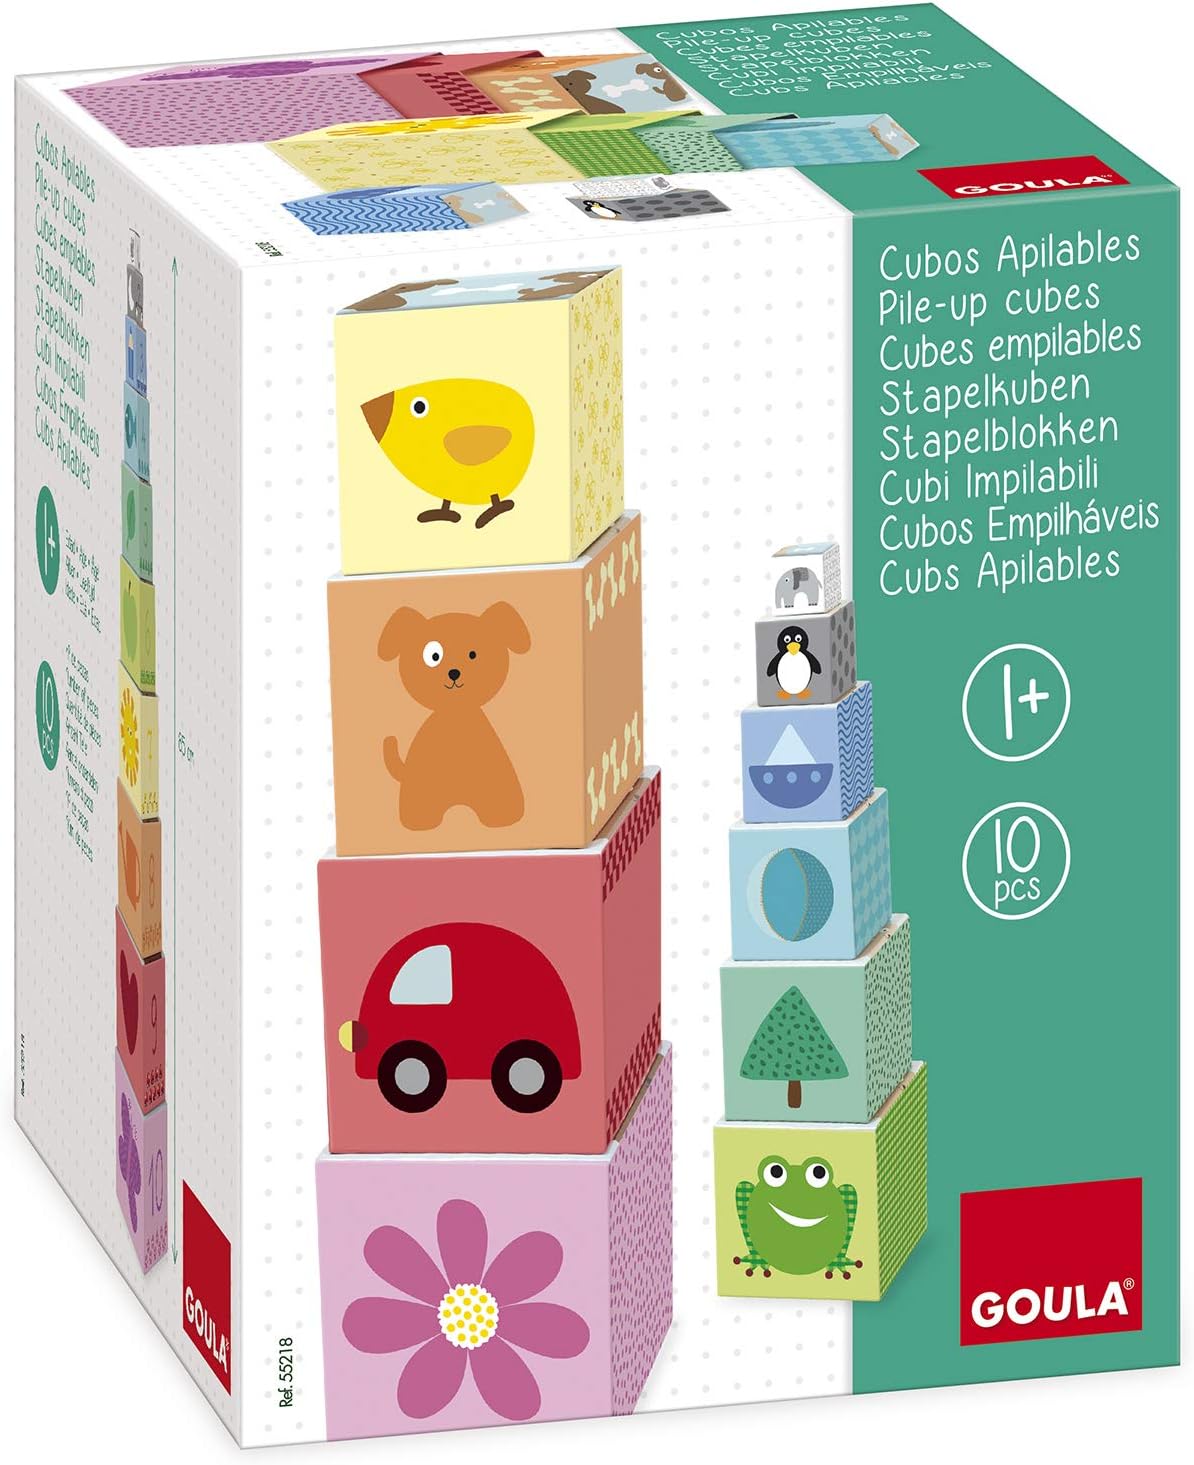 Goula Pile up Cubes 1-10 Color Sorting Block Puzzle Stacking Tower Game 數字顏色排序立方拼圖層層疊遊戲